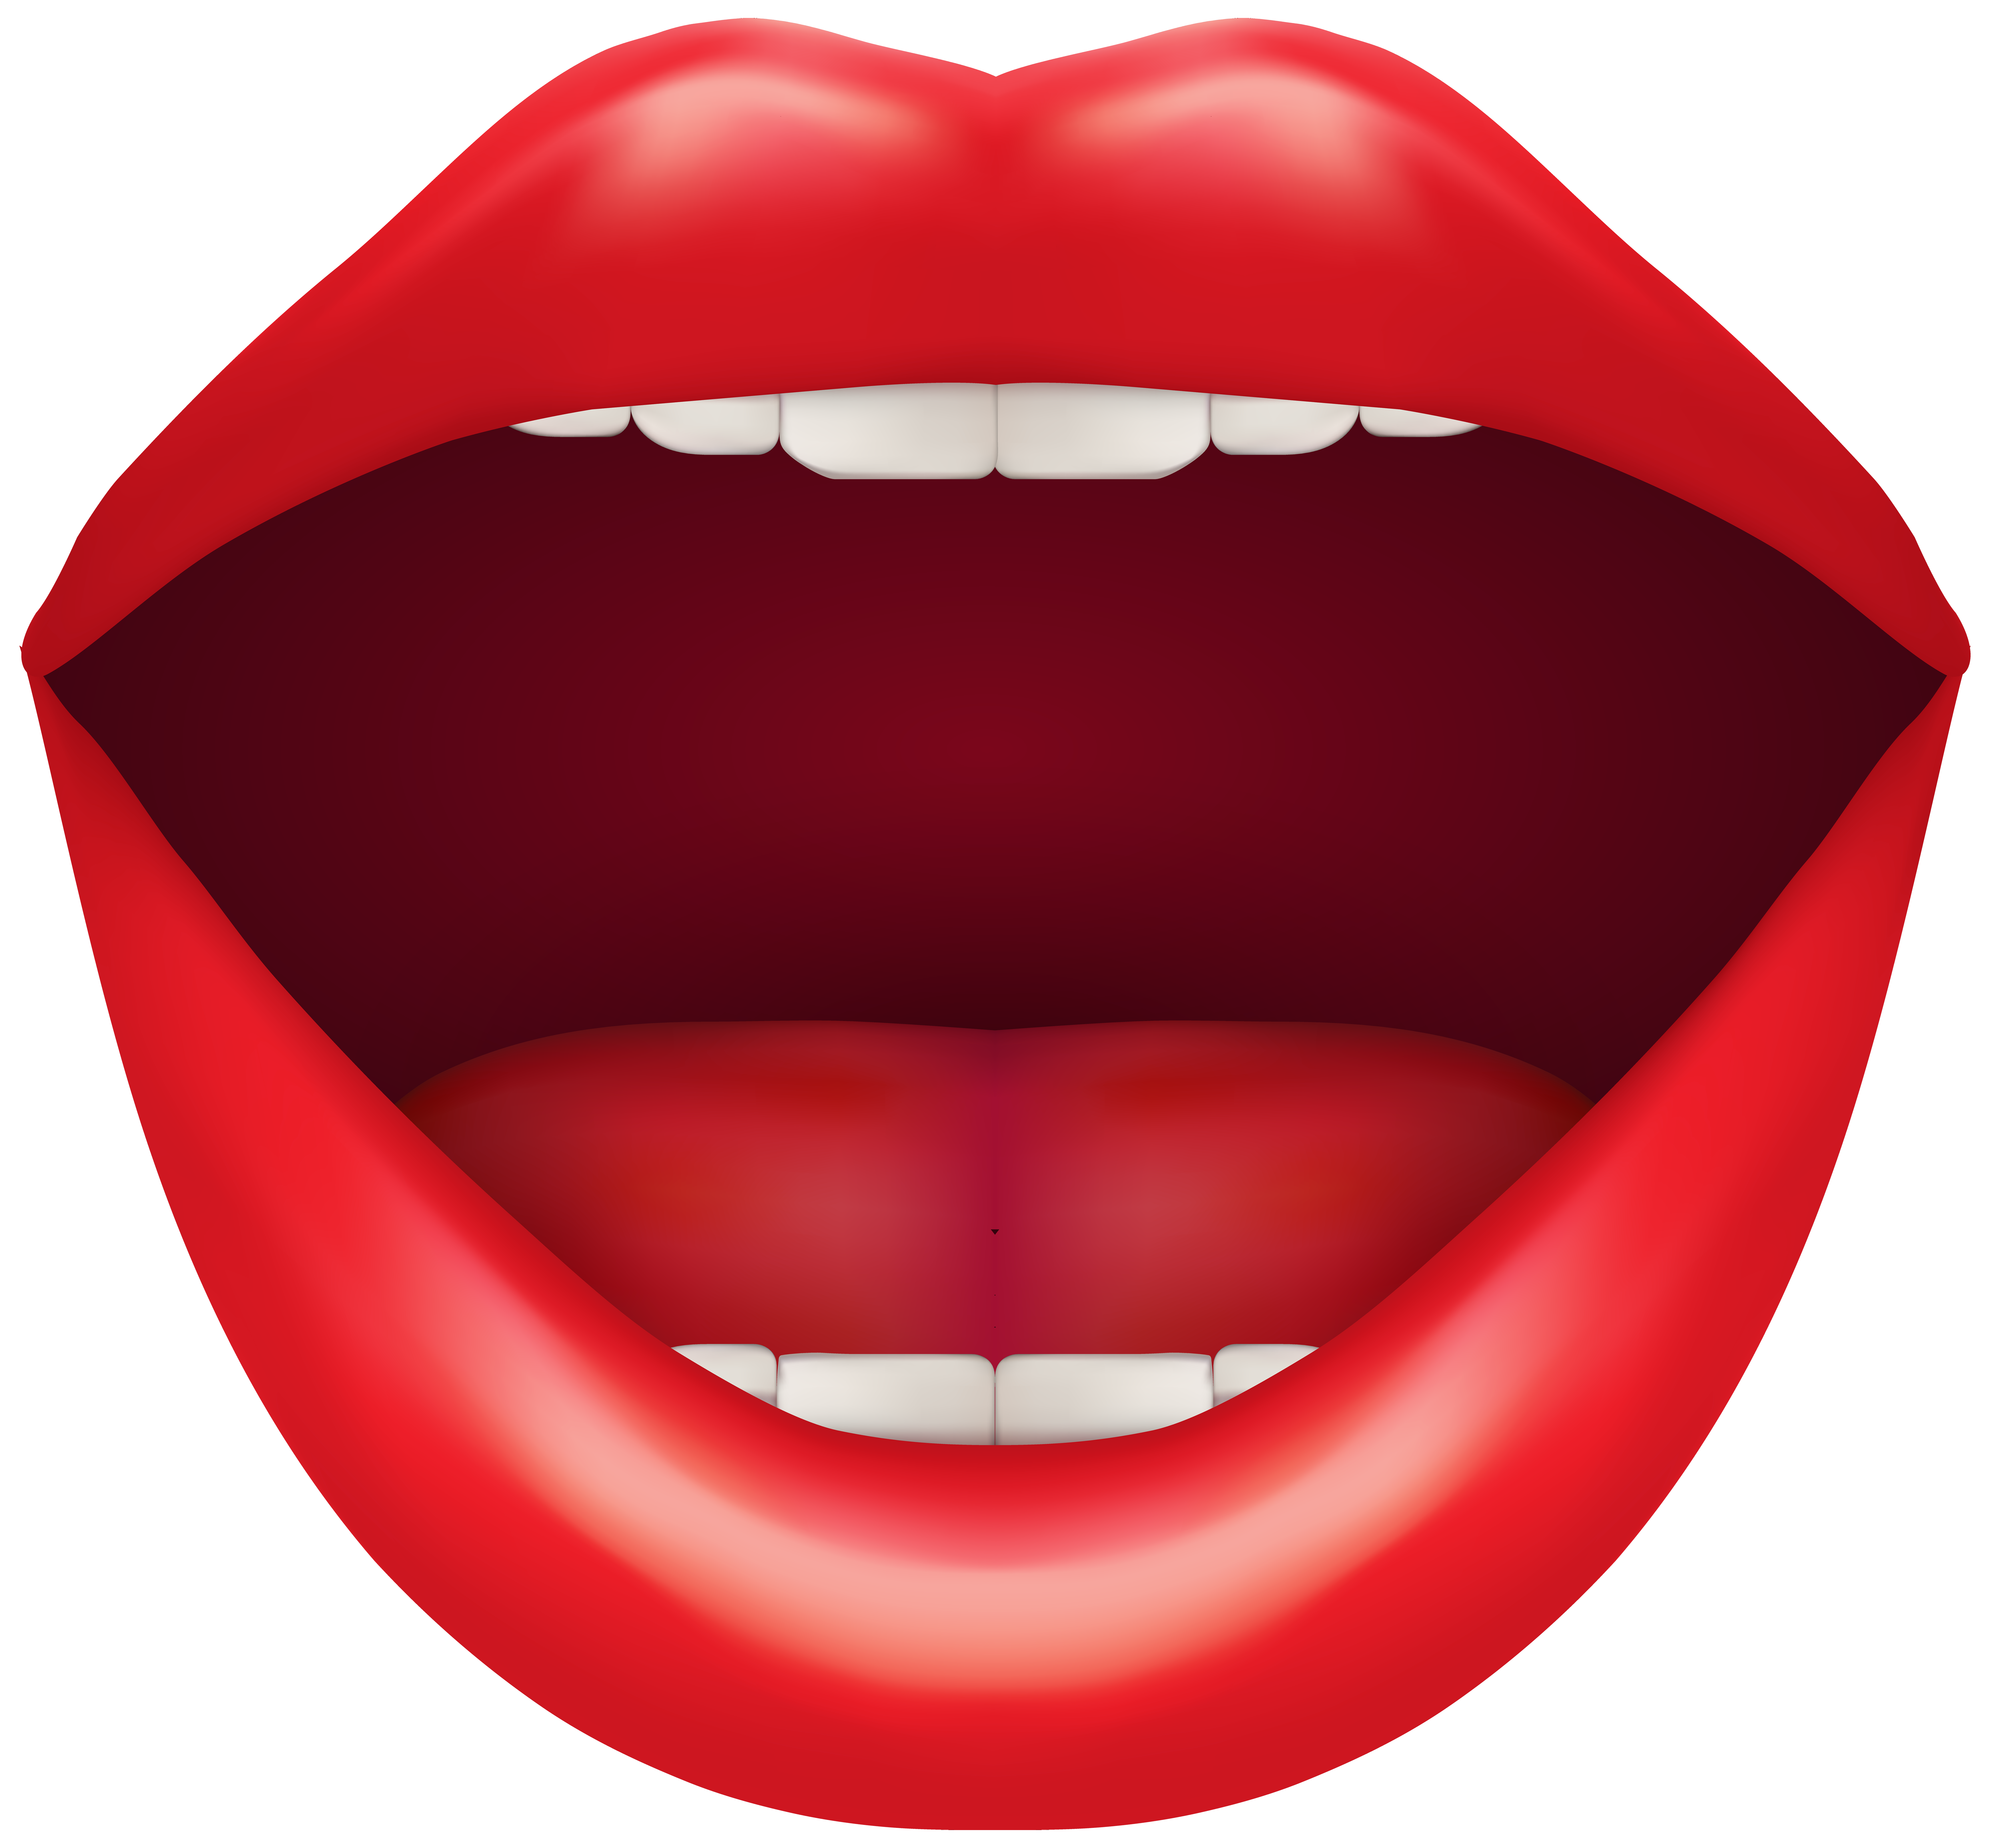 Cartoon Mouth Open PNG Images Transparent Background | PNG Play